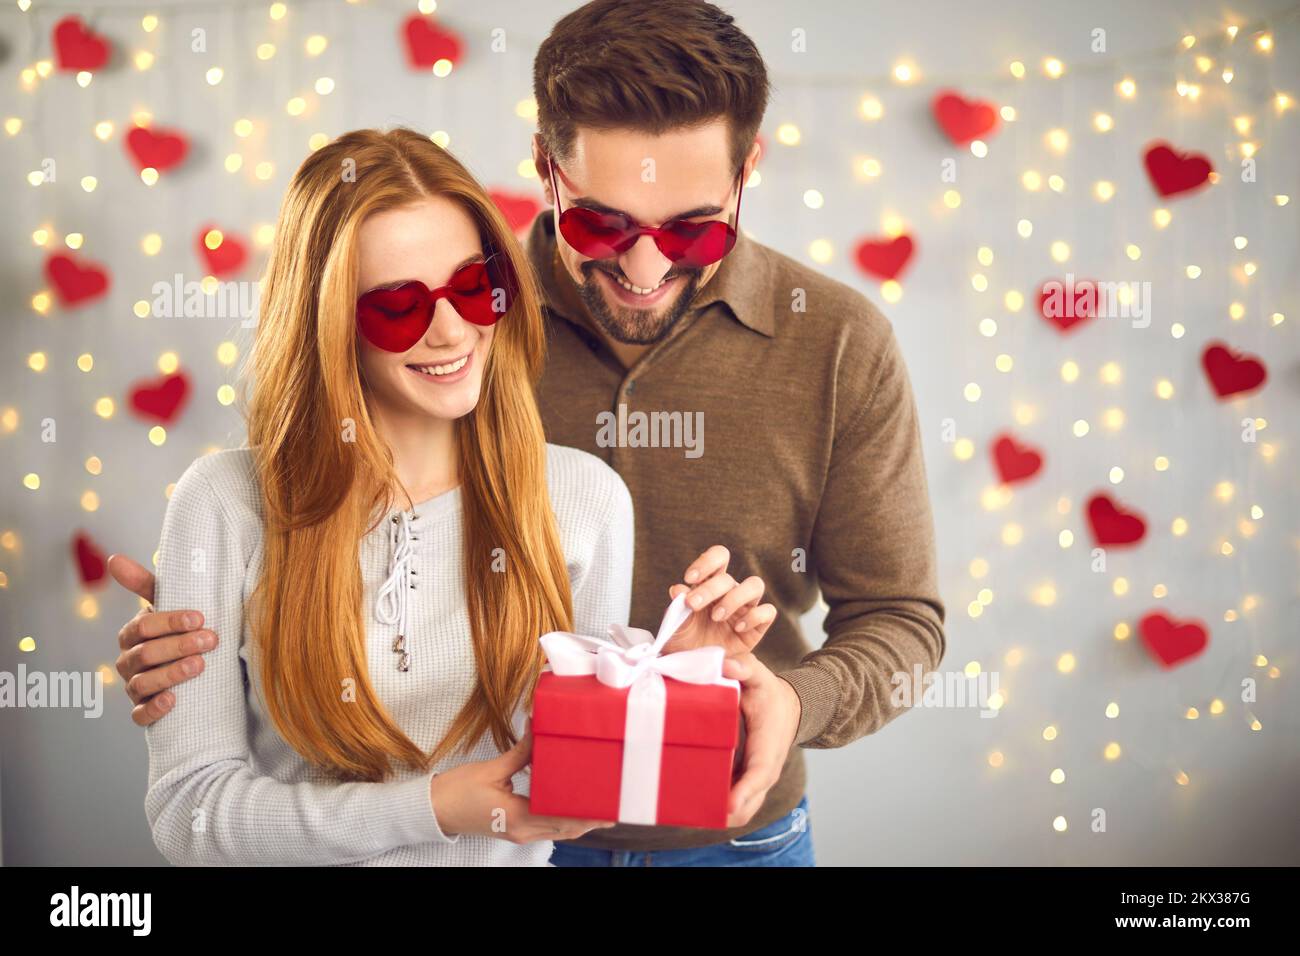 Loving couple unpacks a gift for Valentine's Day standing on a background of garlands and hearts. Stock Photo